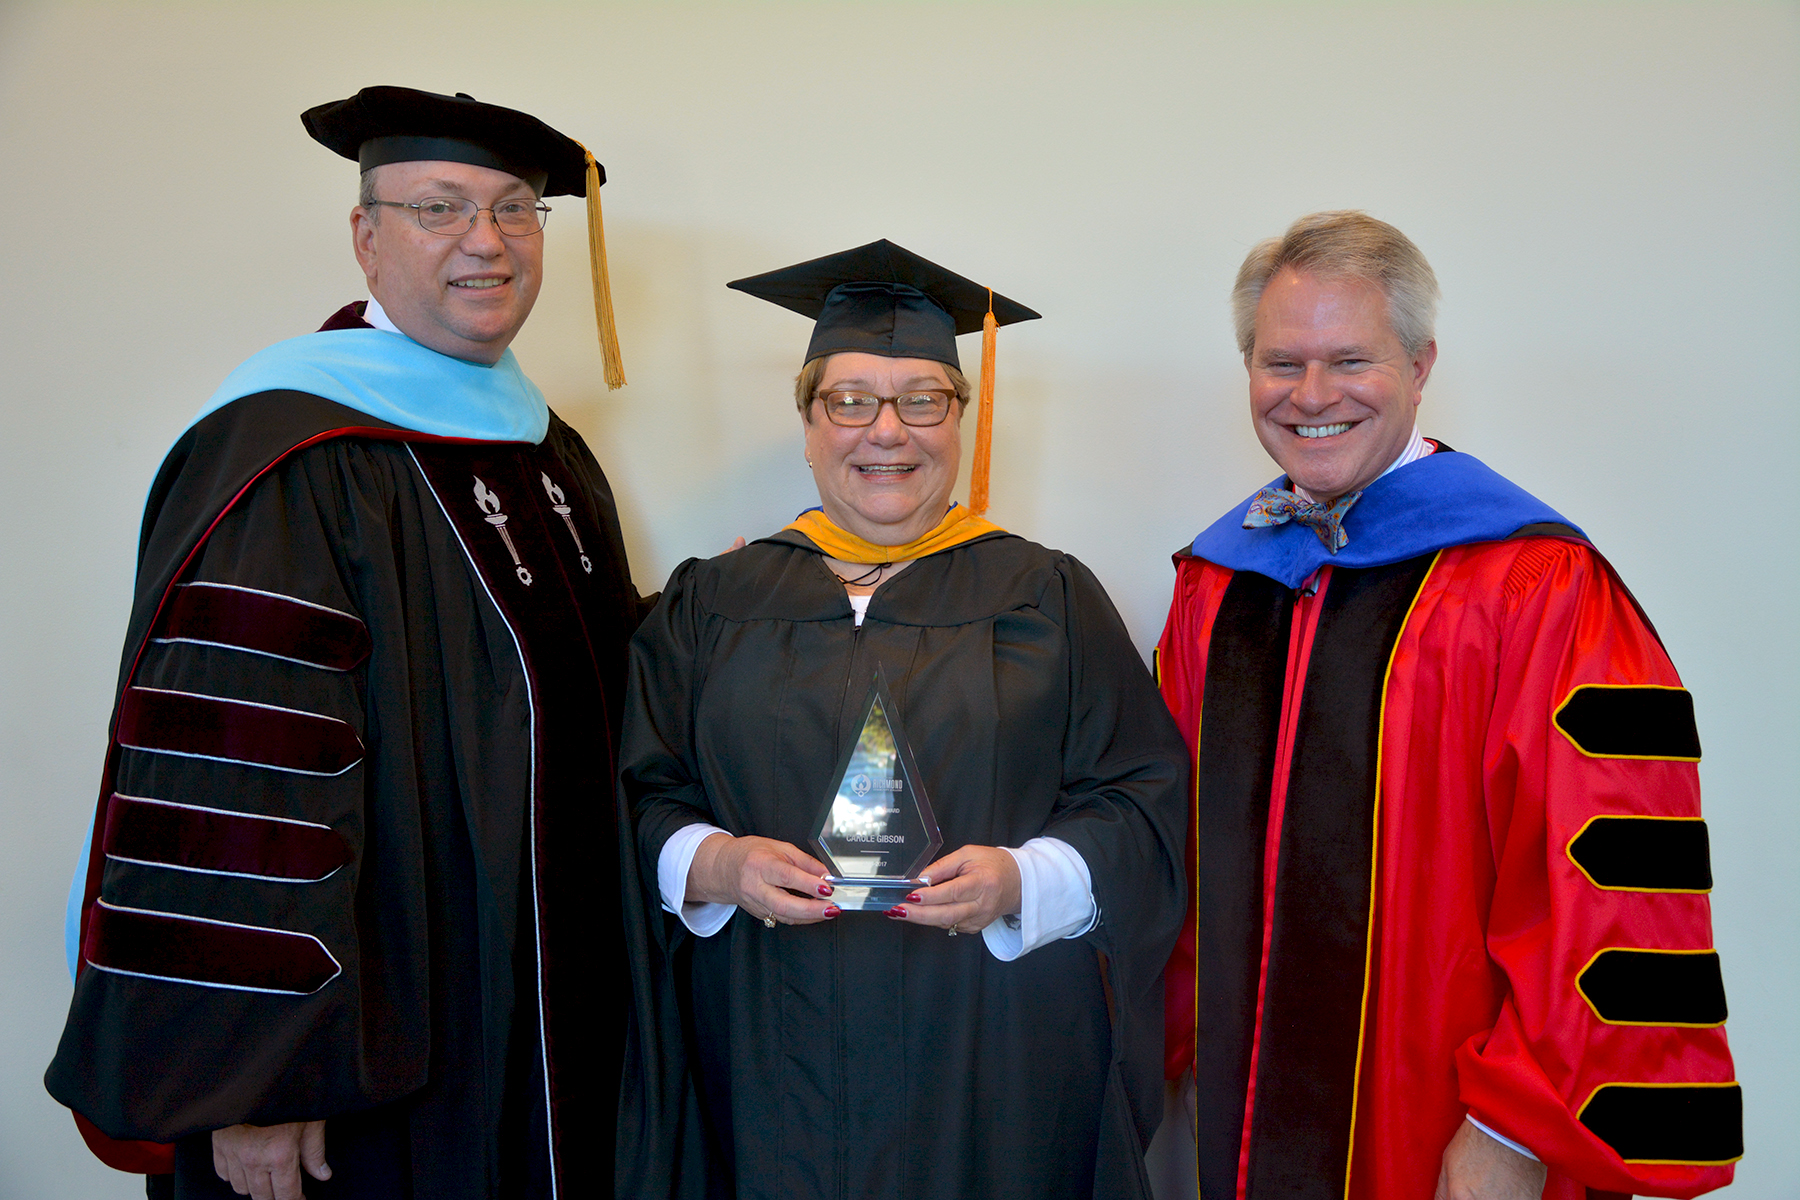 Pictured, from left, are Dr. Dale McInnis, RichmondCC president; President's Award recipient Carole Gibson; and Dr. Jimmie Williamson, NC Community College System president.